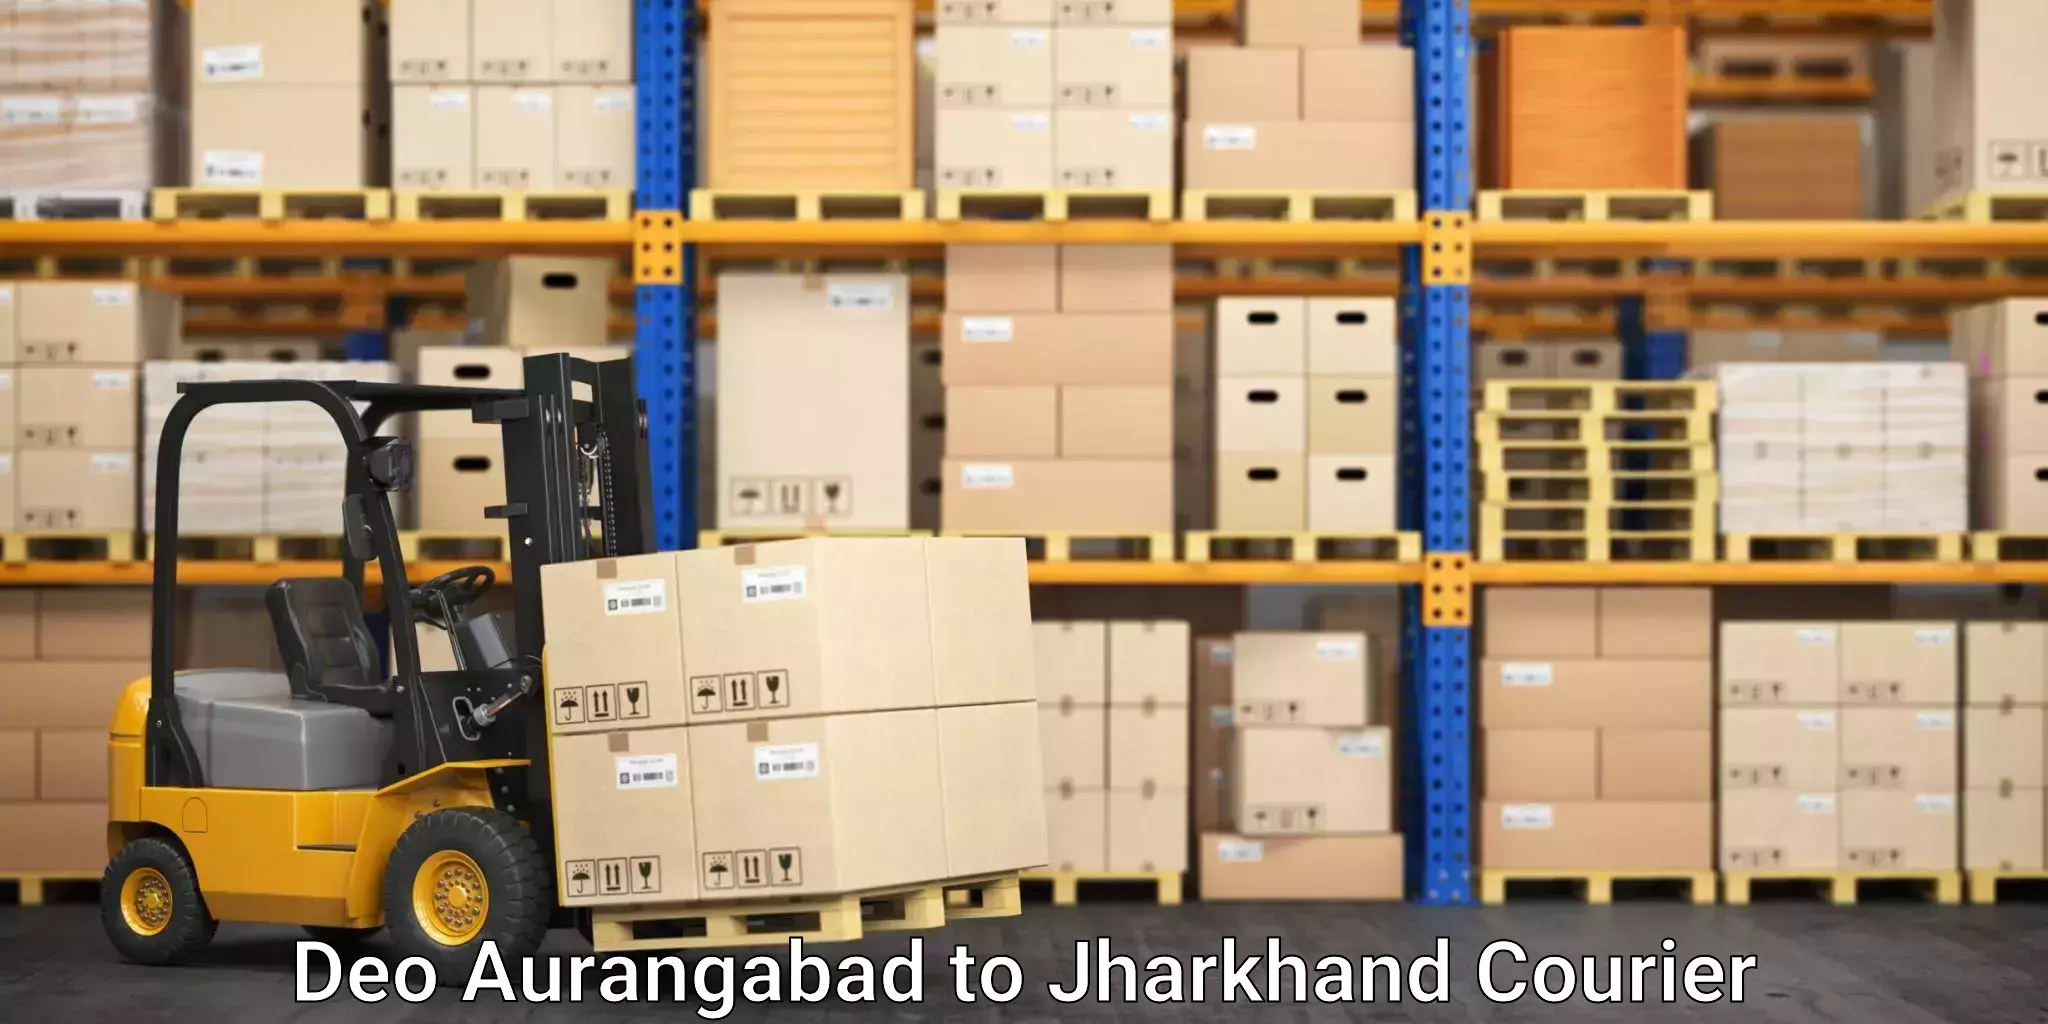 Advanced relocation solutions Deo Aurangabad to Jharkhand